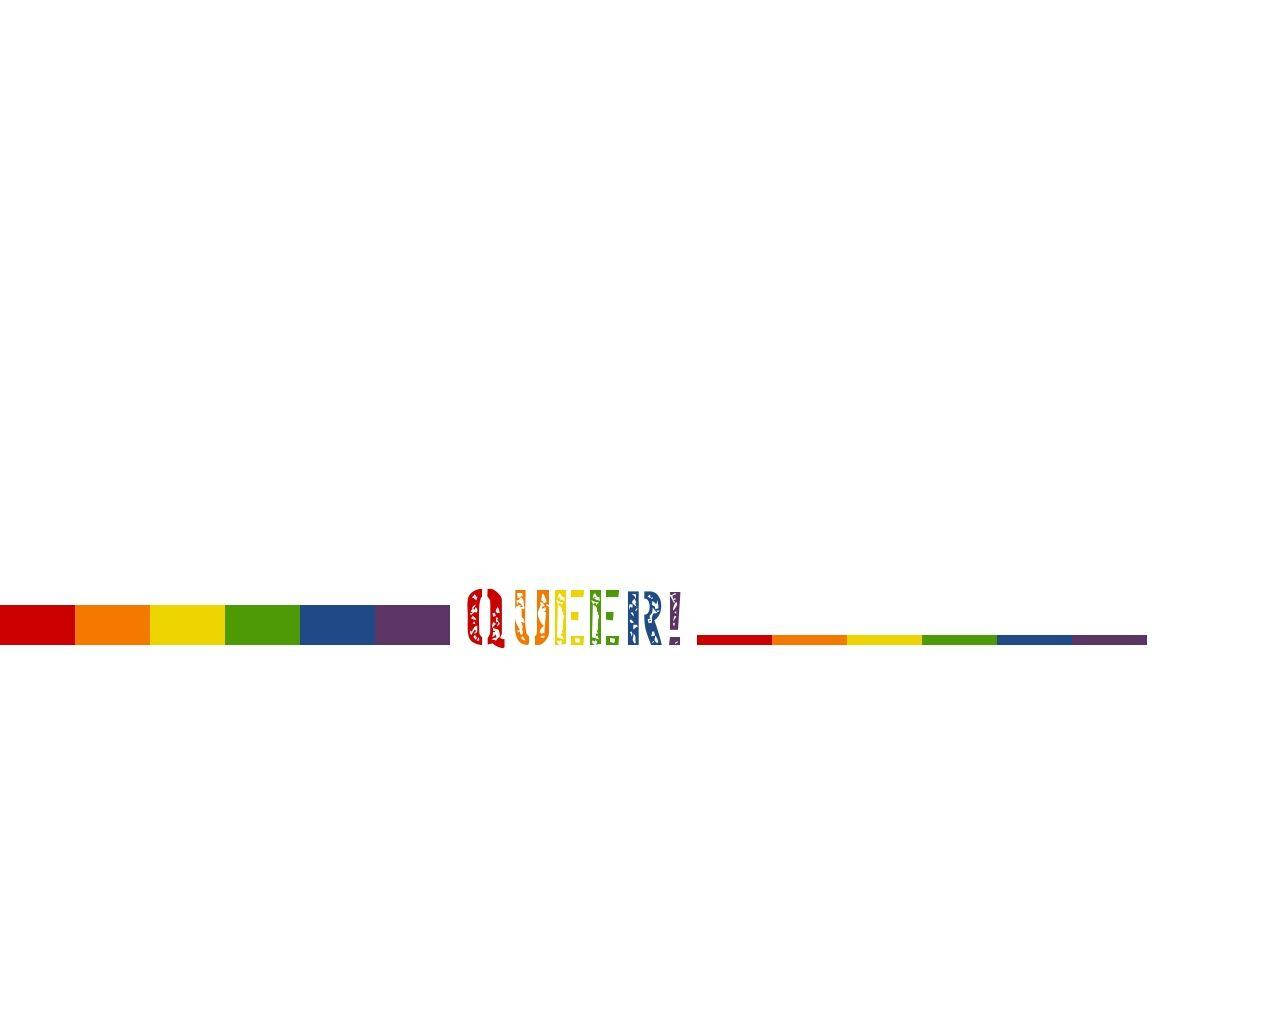 Queer Text In Rainbow Colors On A White Background Wallpaper